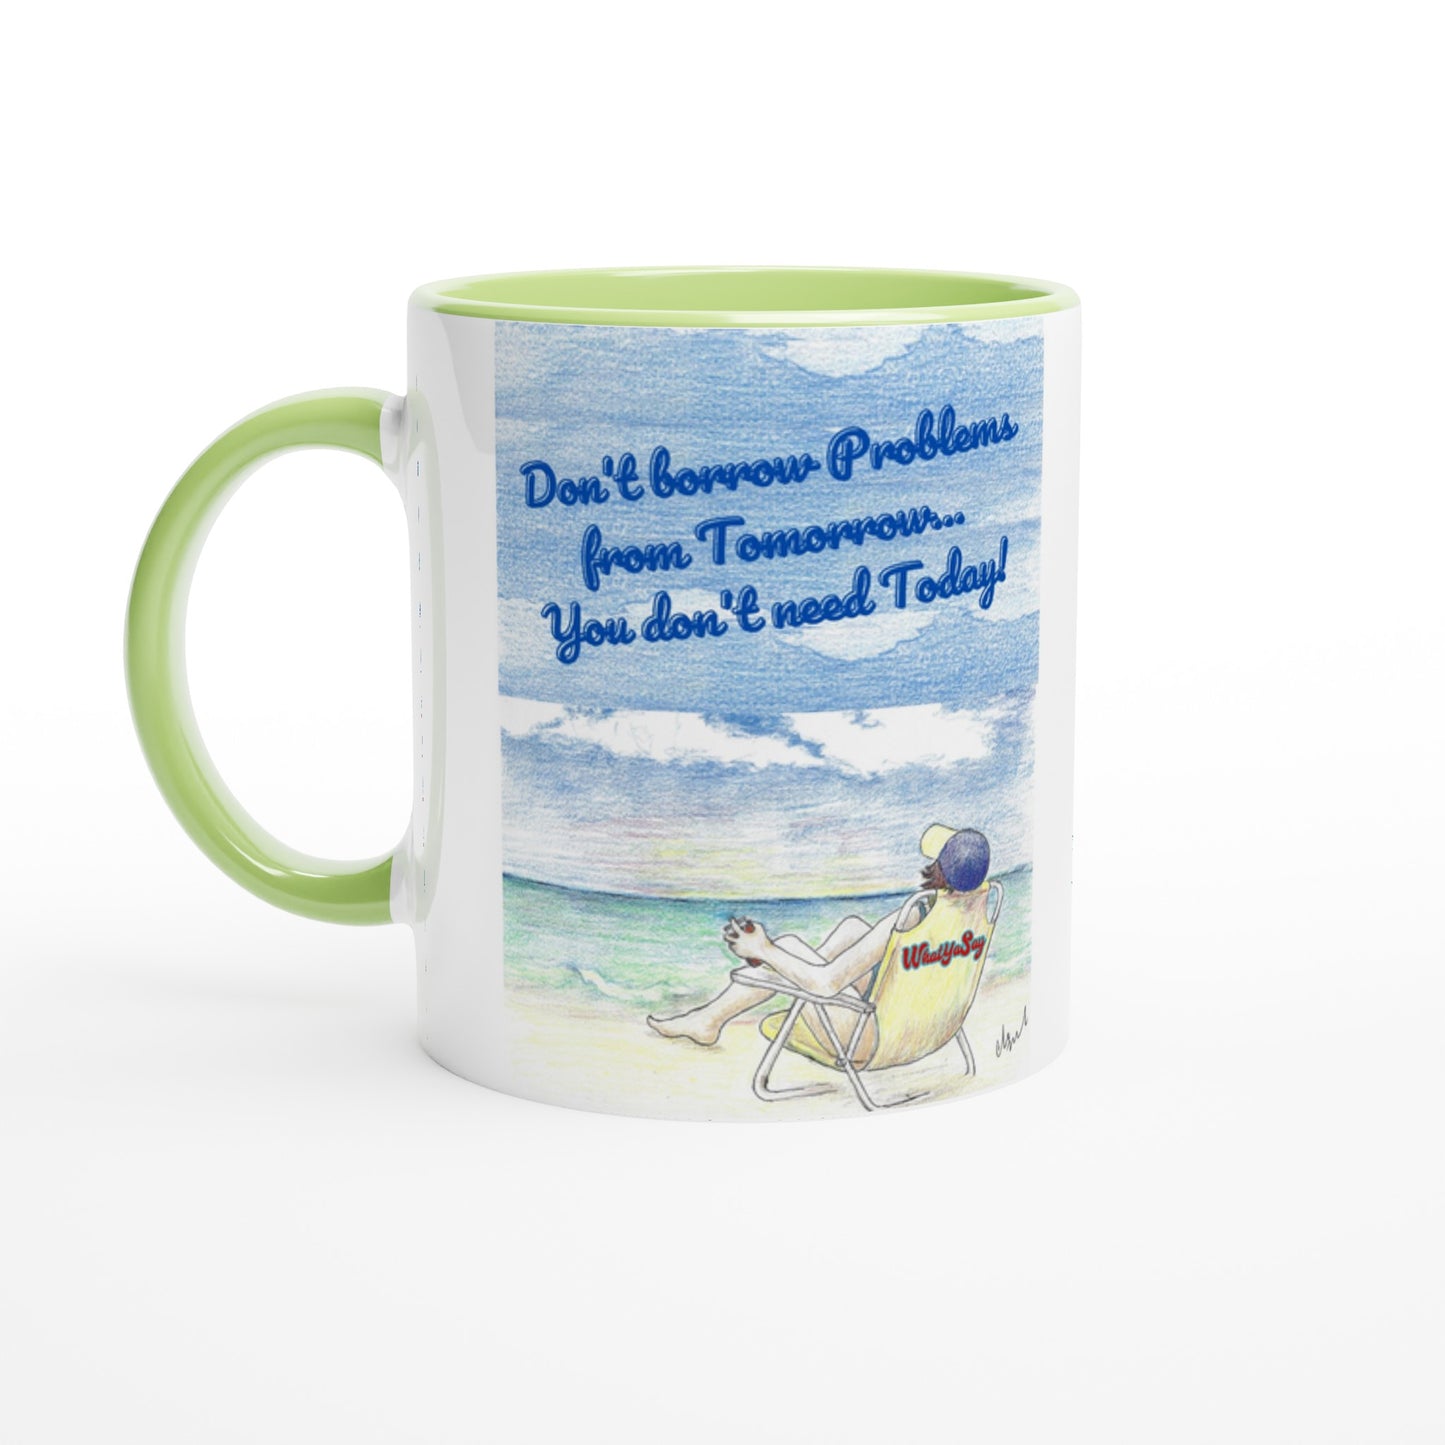 Funny saying Don't borrow Problems from Tomorrow... You don't need Today!  11oz white ceramic mug with green handle, rim and inside and coffee mug is dishwasher safe and microwave safe.